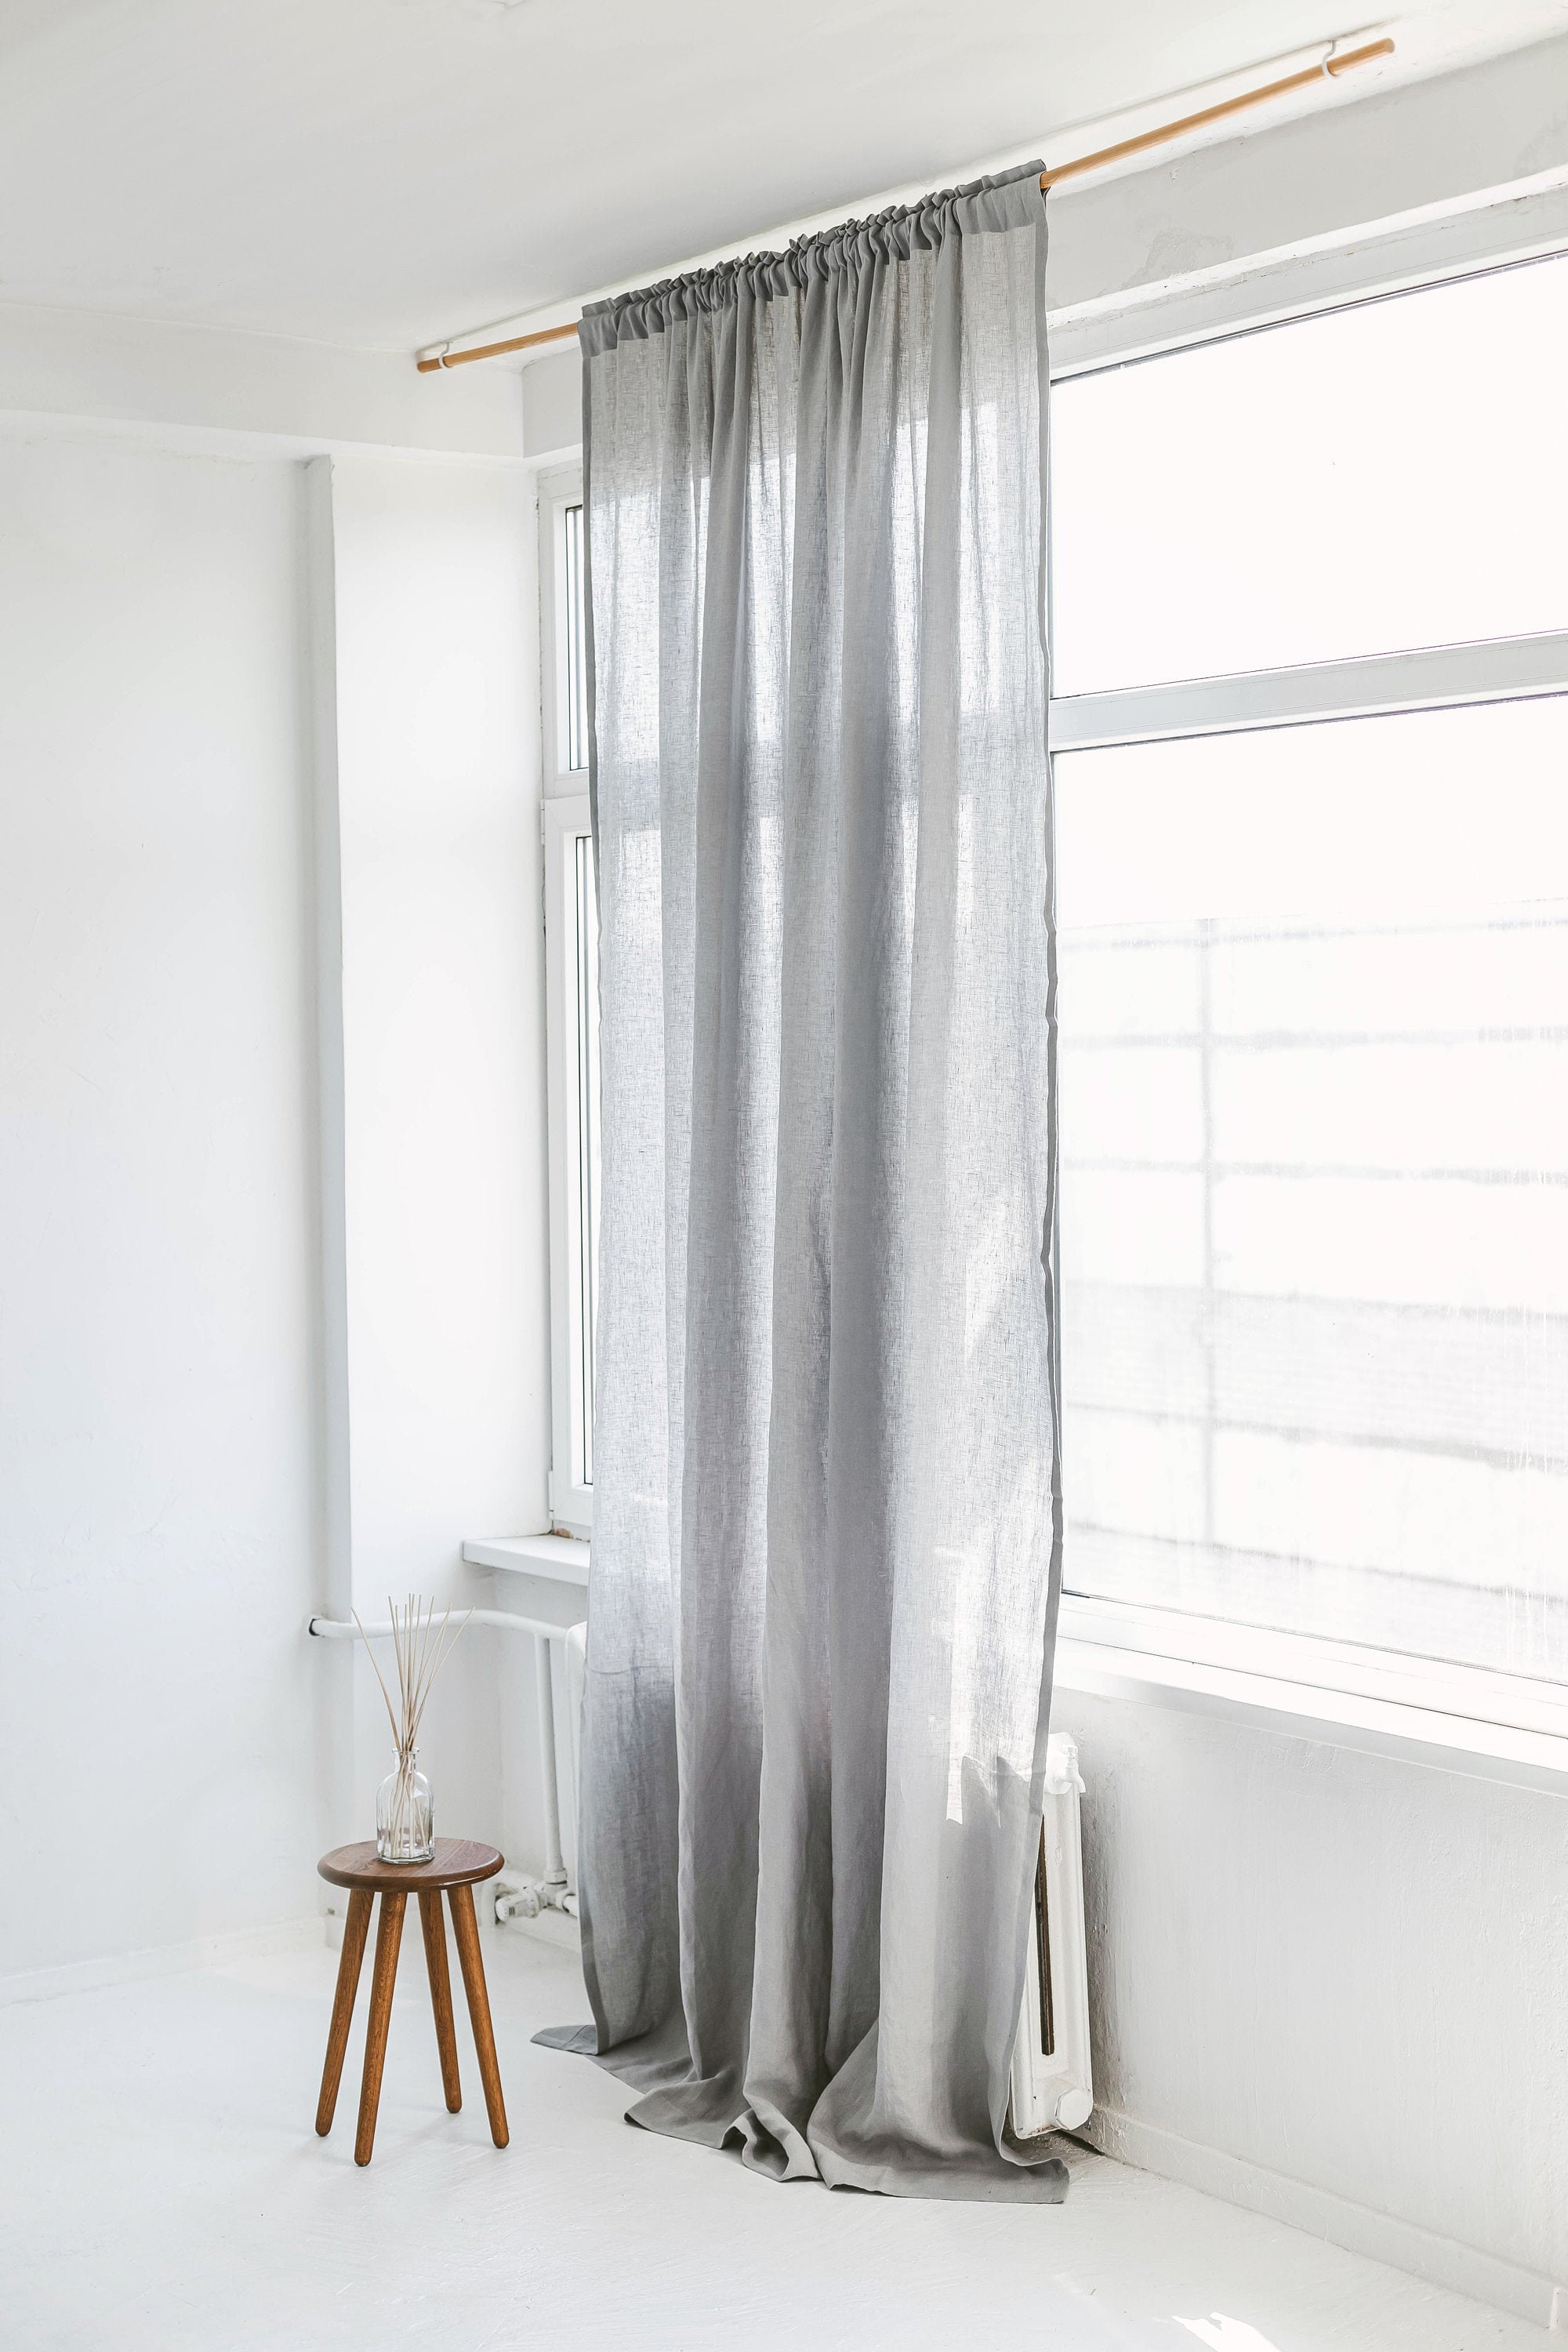 Blackout Linen Curtains With Grommets, 30 Colors, 1 Panel, Grommet Curtain  Panels, Linen Window Curtains, Privacy Linen Eyelet Curtains 